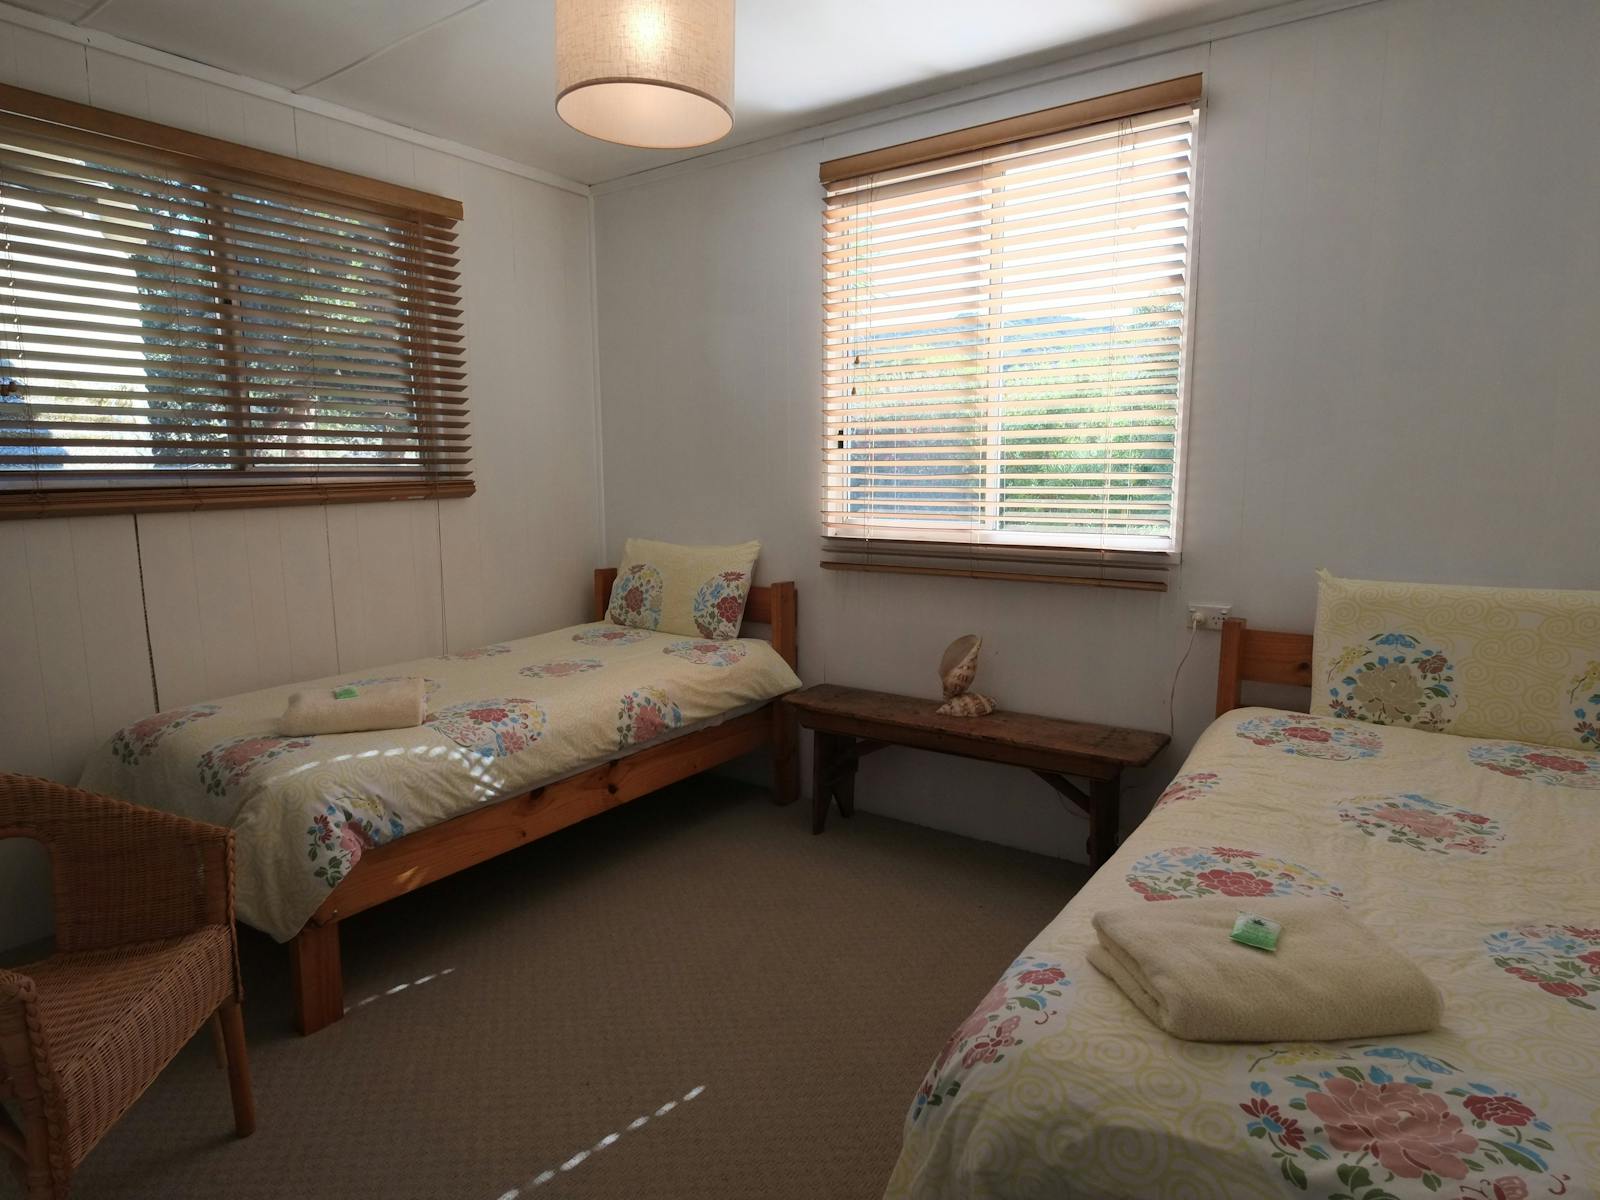 Bright sunny twin single room with wool donnas and wool blankets.